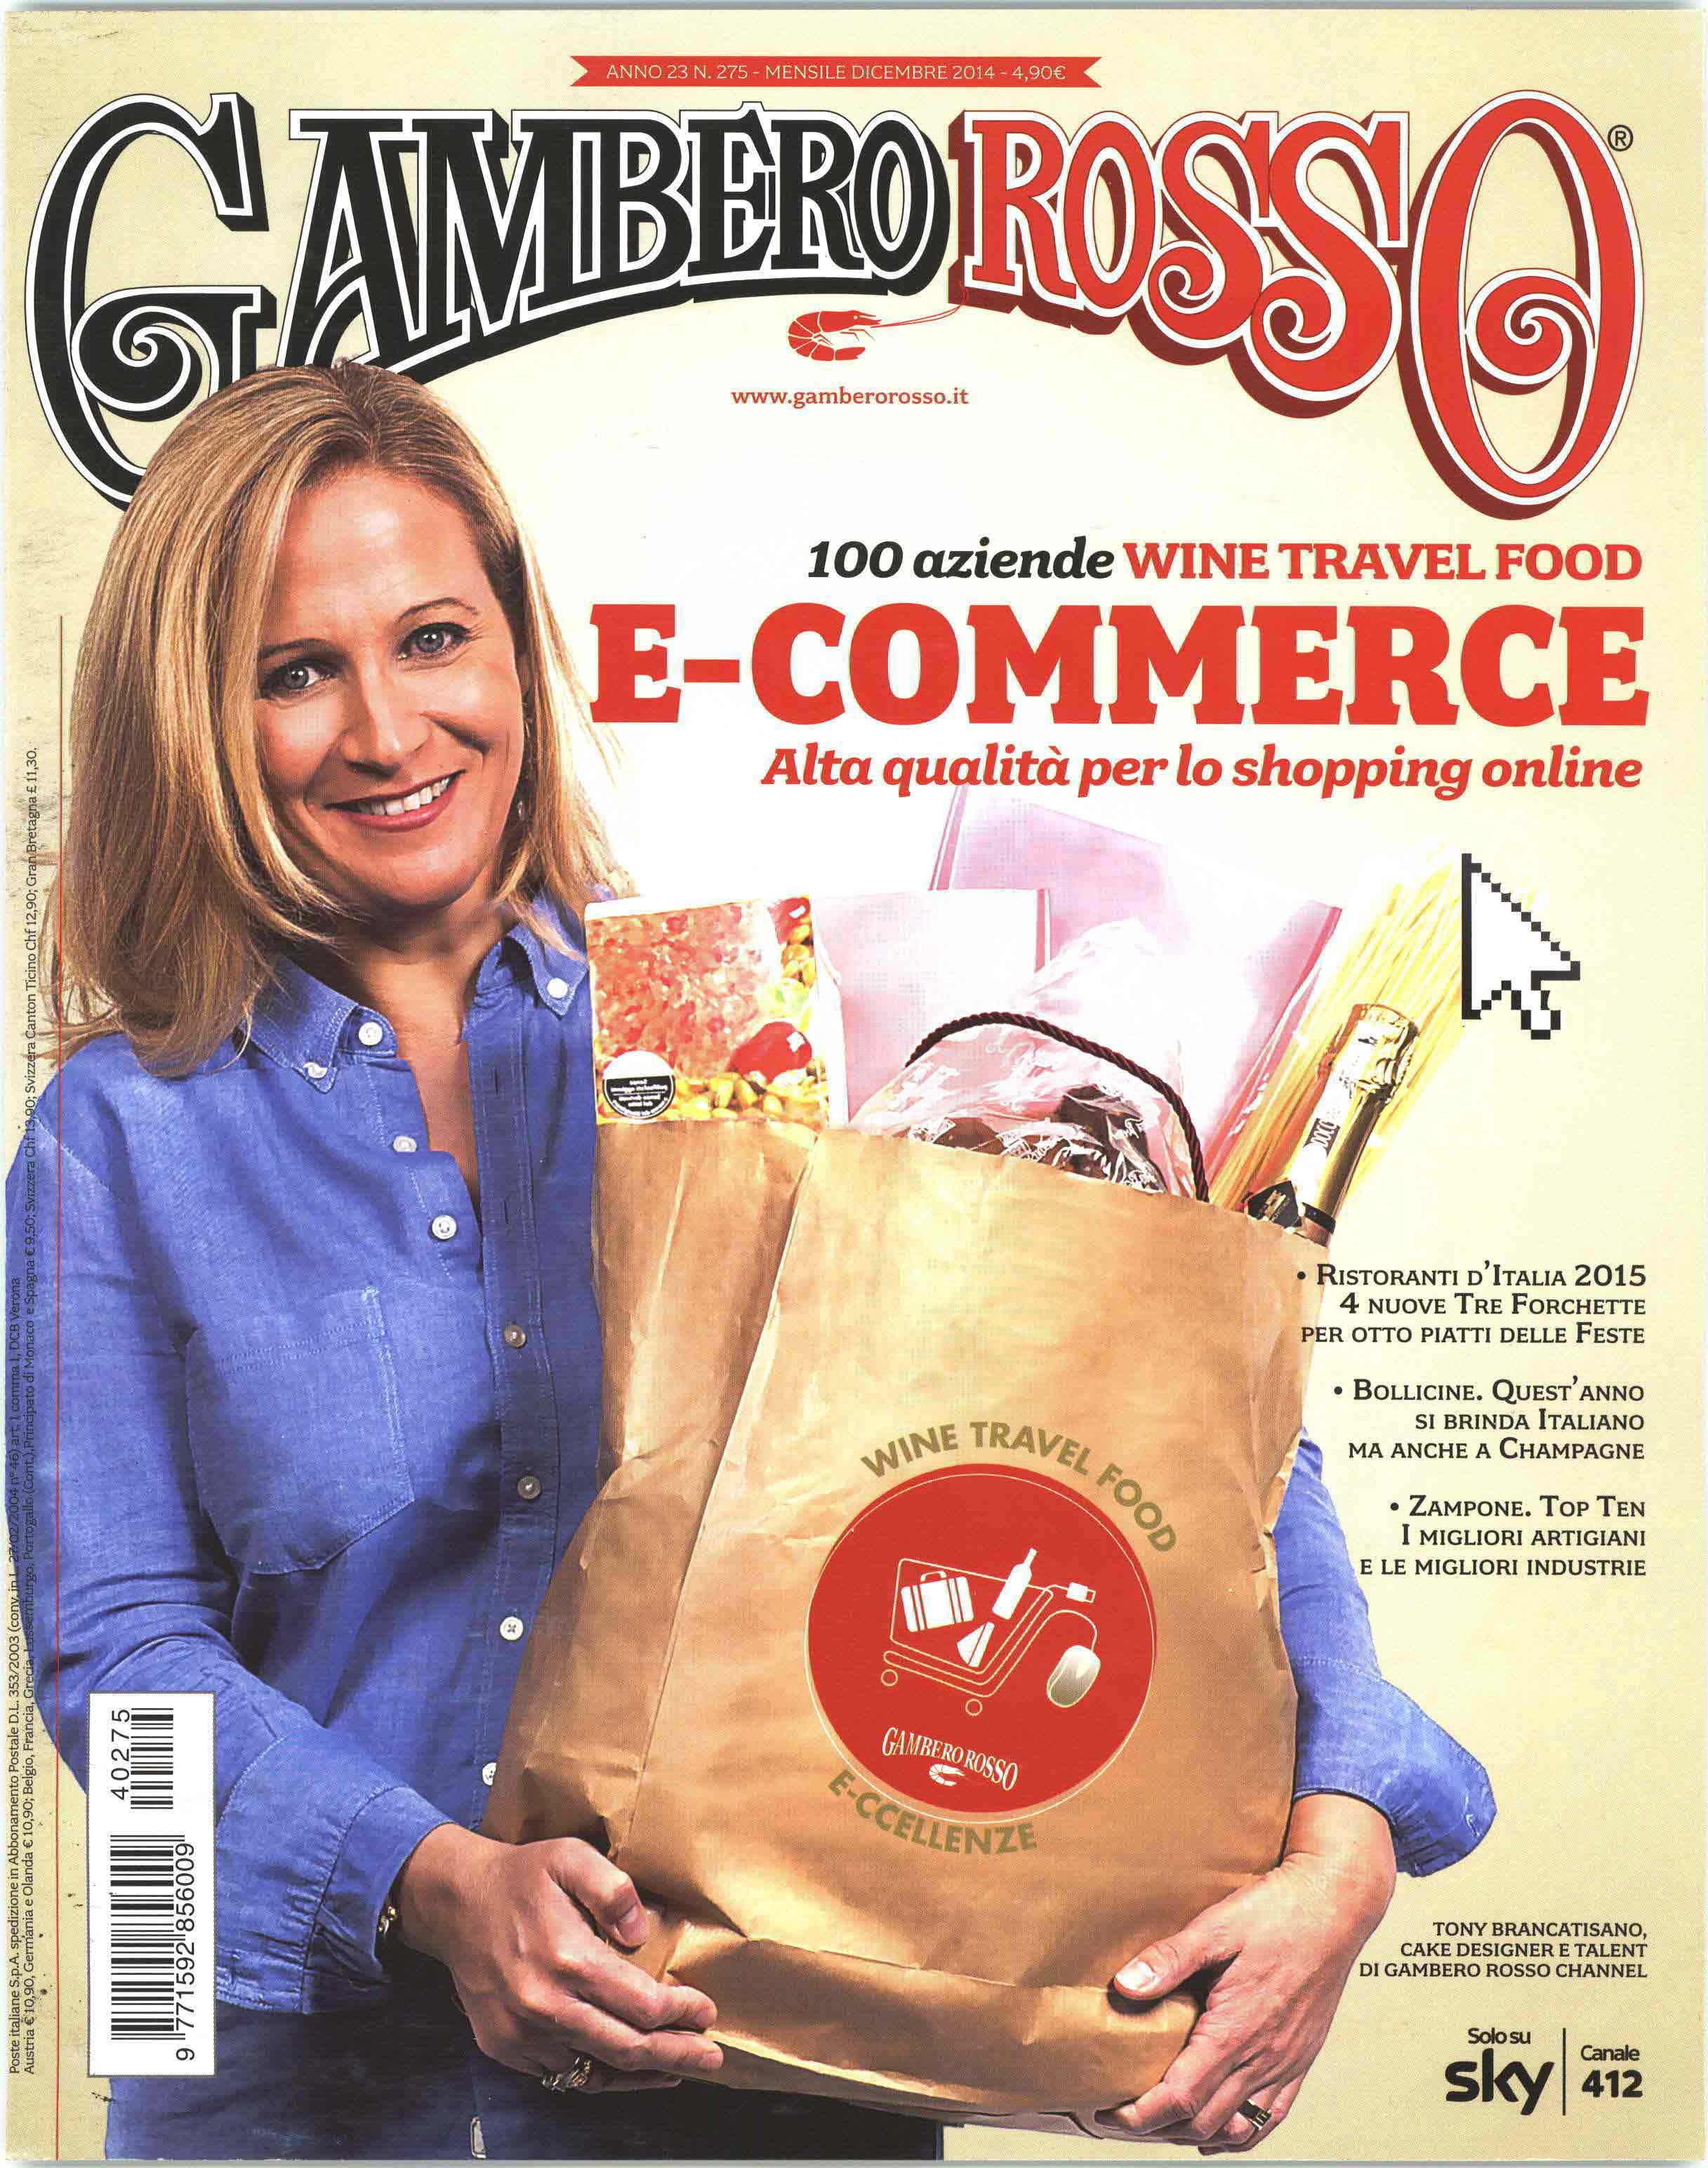 gambero rosso cover 2014 wine travel food ecommerce